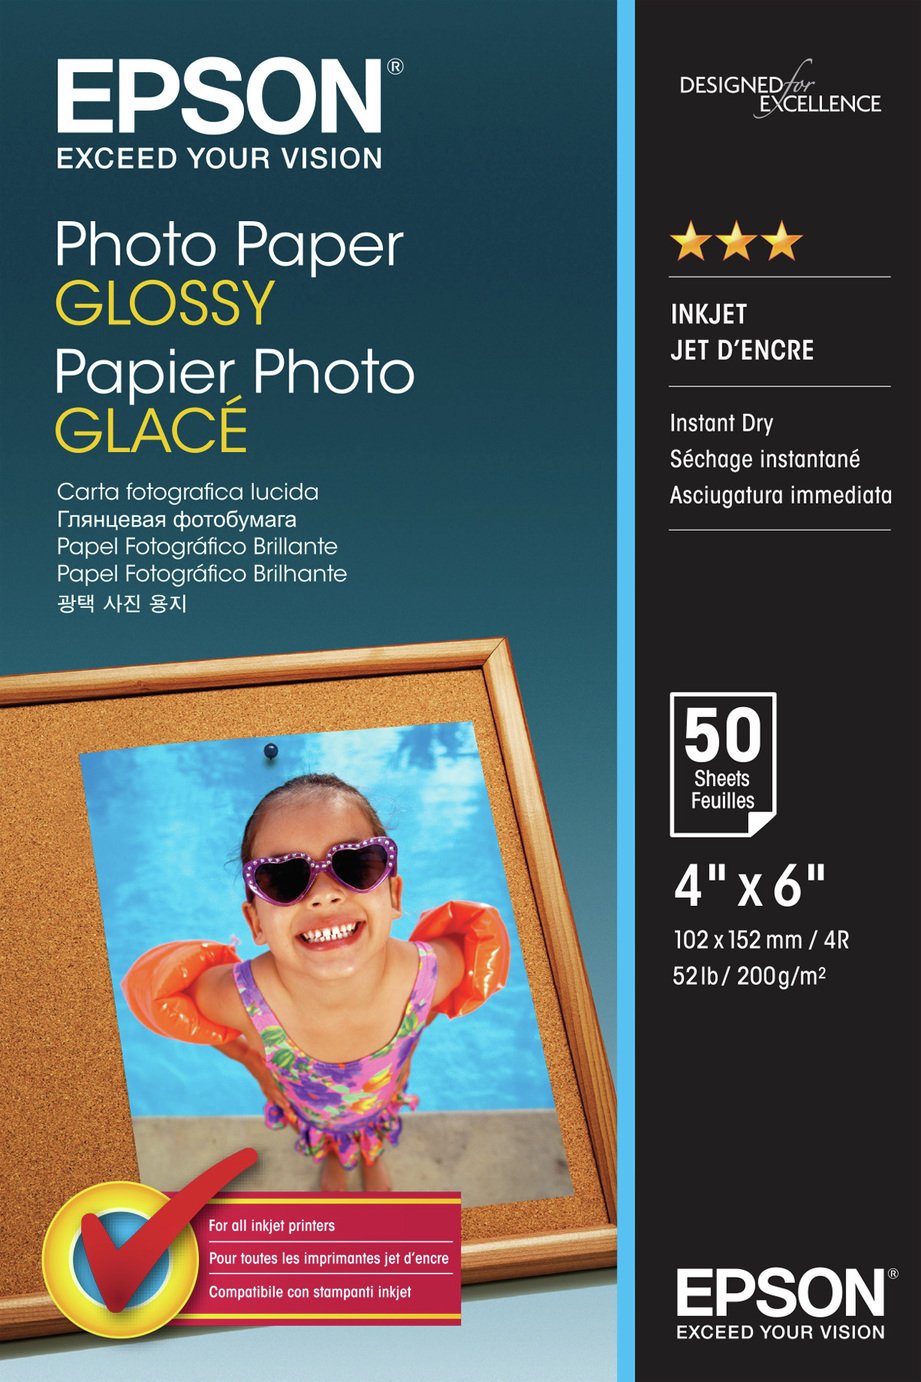 Epson 10x15cm Gloss Photo Paper Review